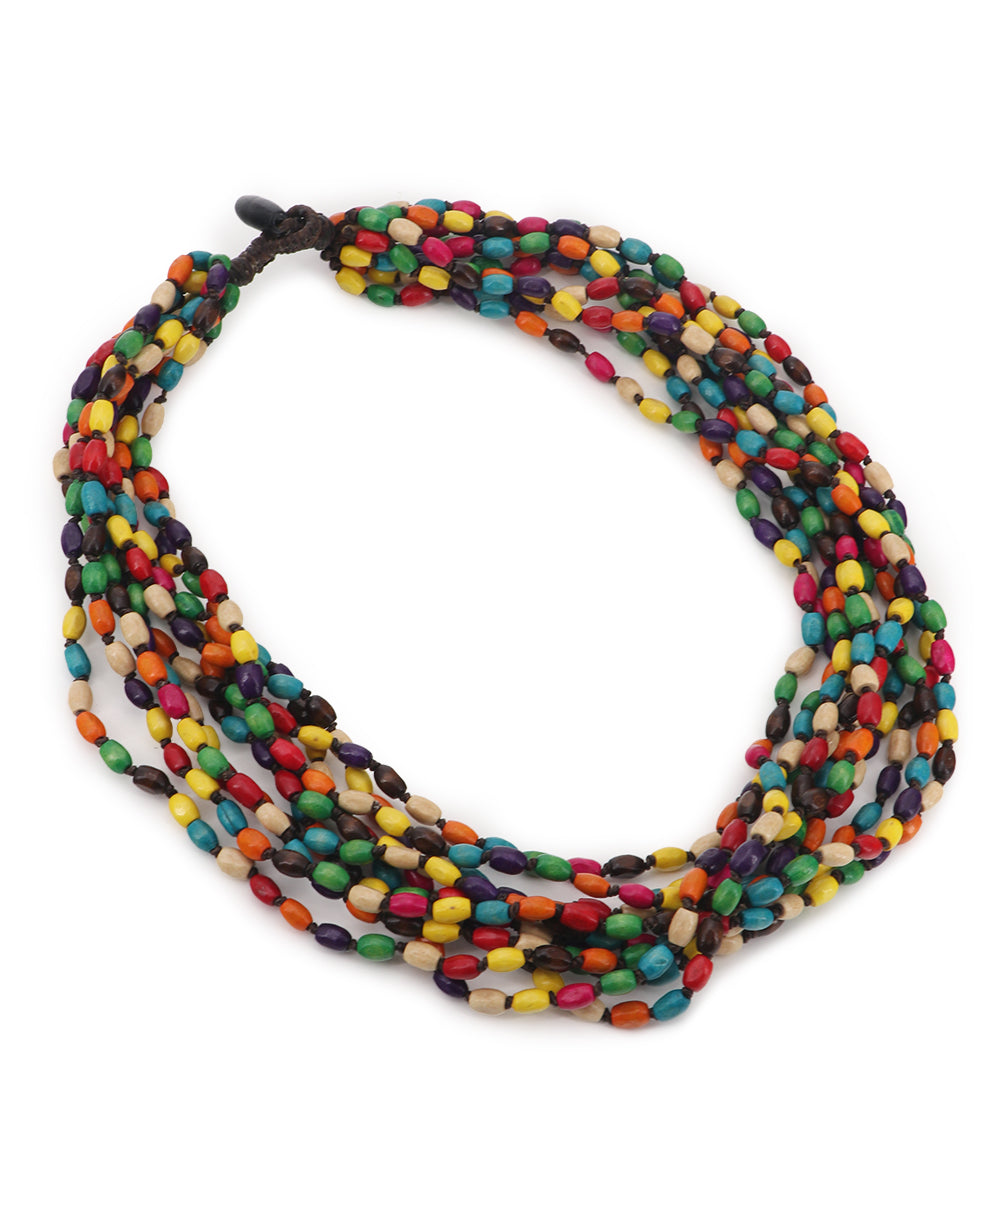 Button and loop closure on this colorful beaded necklace with 10 strands made of boxwood beads